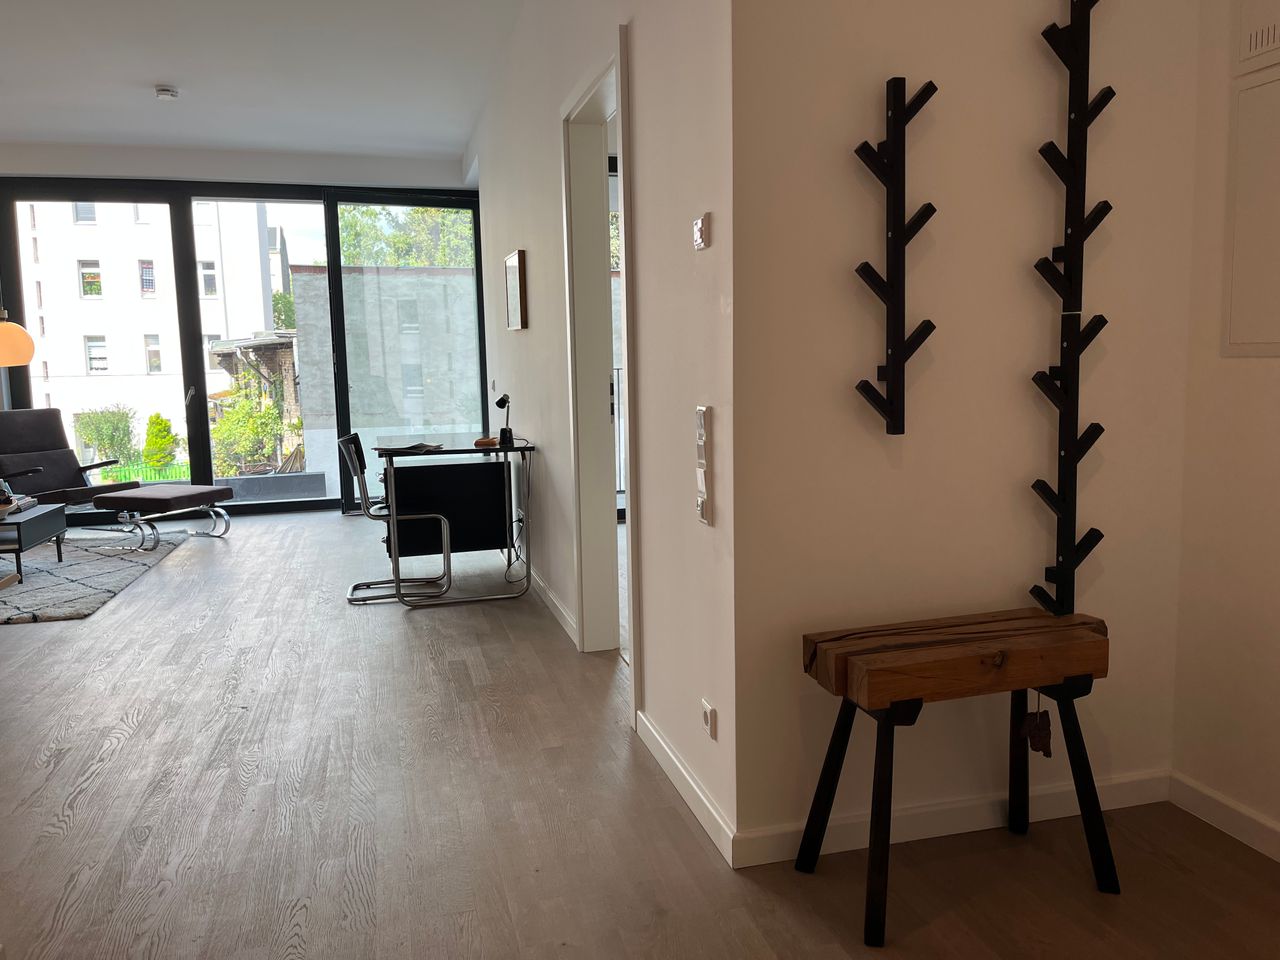 62 m² | 2 -rooms in Mitte - Wedding, near Virchow Clinic